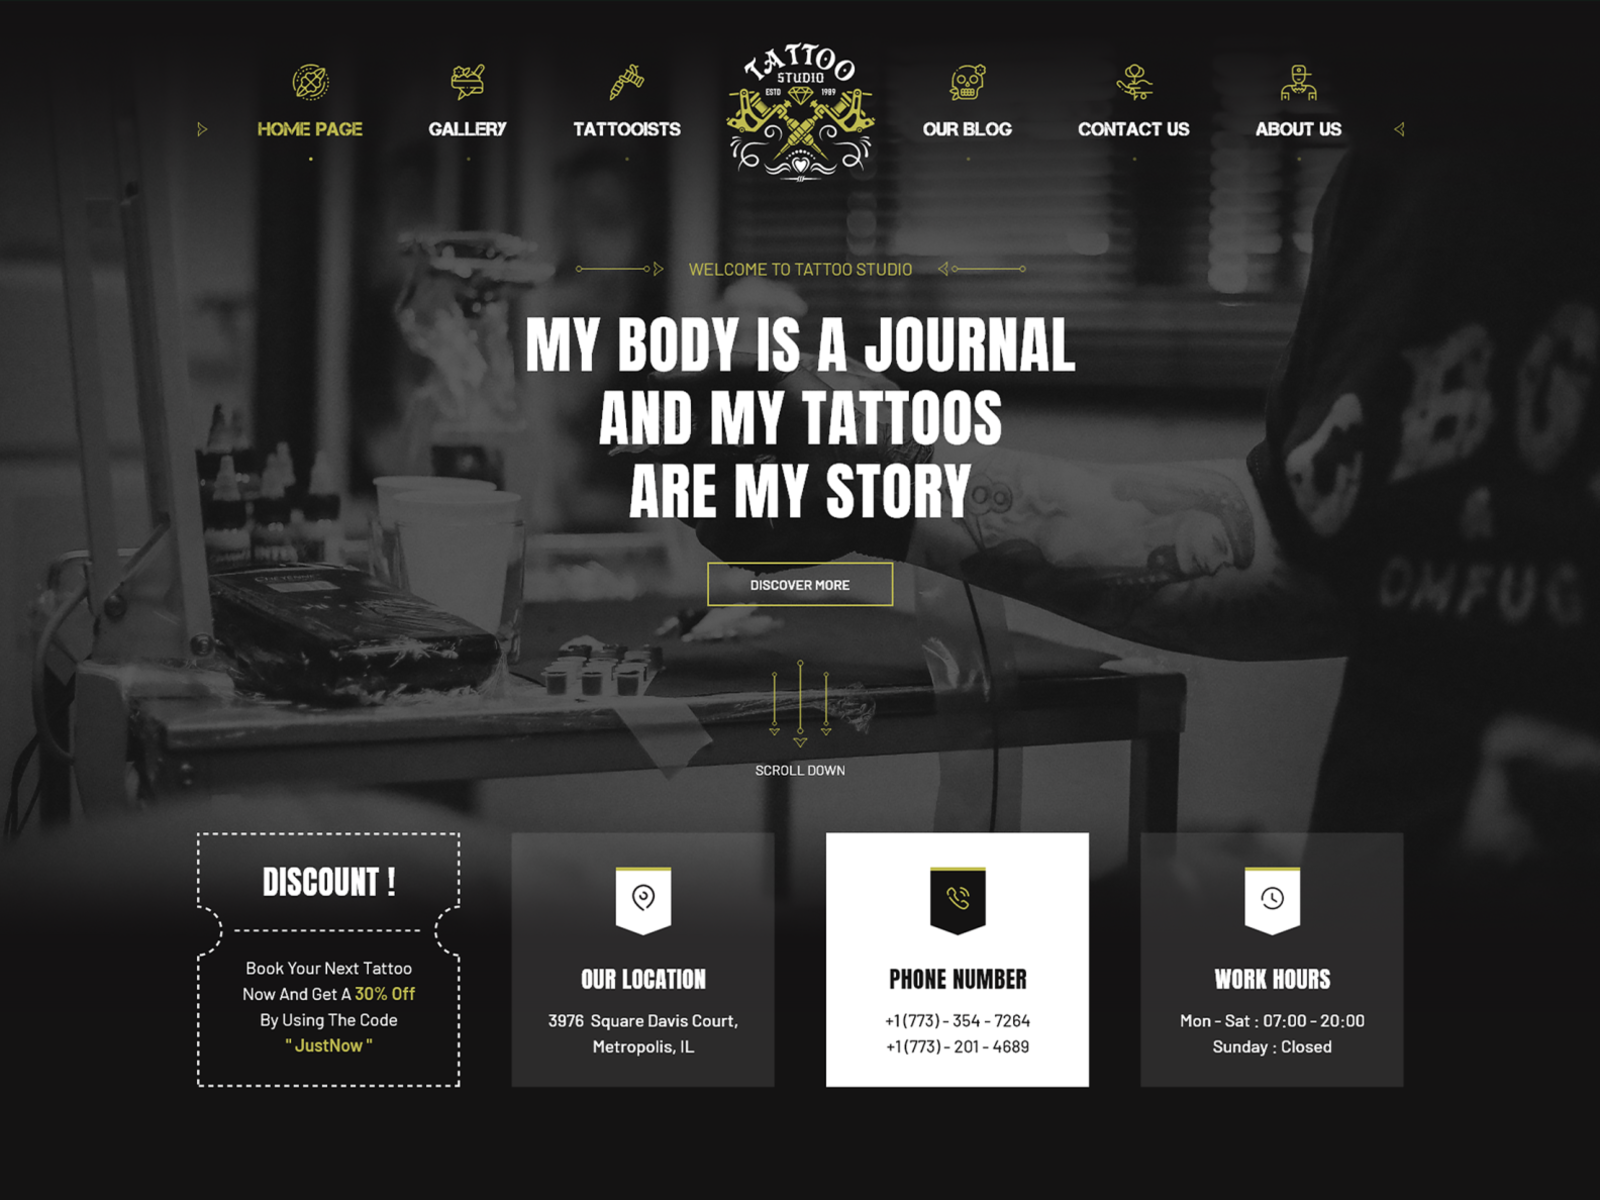 Tattoo Studio Services With Discount And Samples Of Work Online Twitter  Post Template - VistaCreate